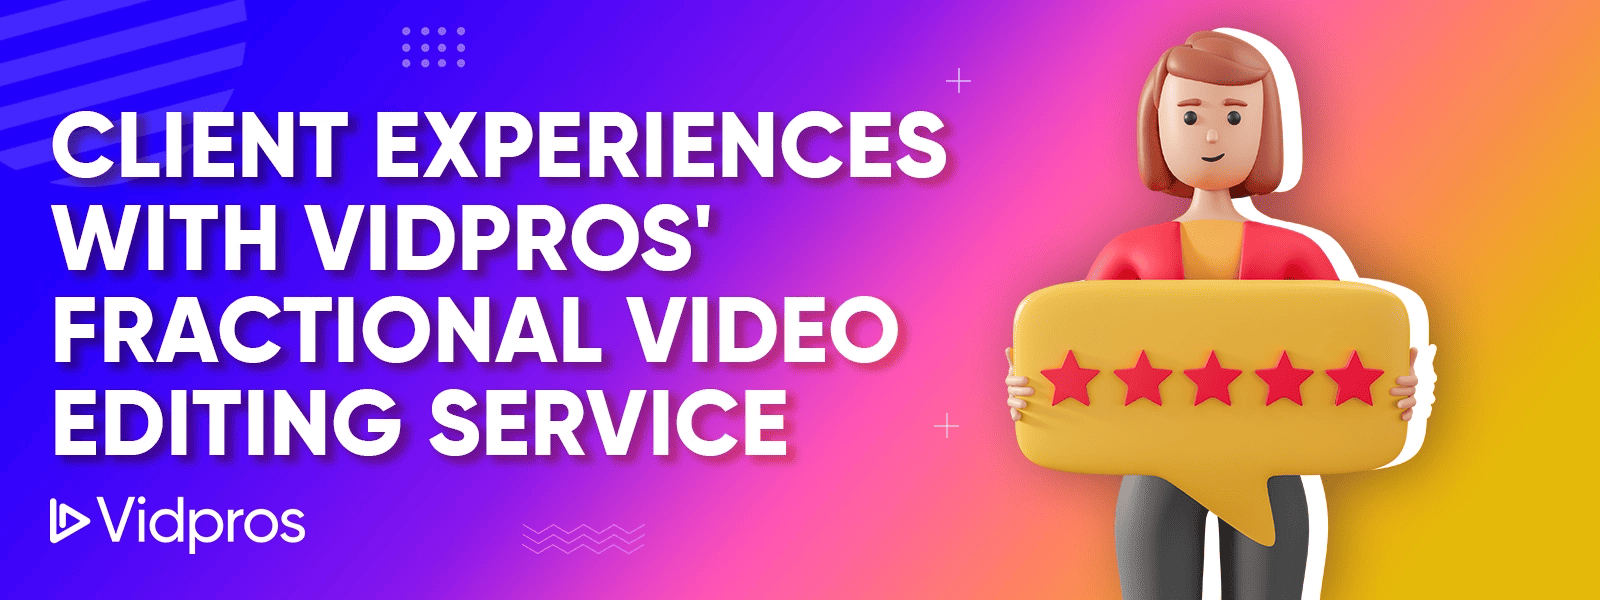 client experiences with Vidpros